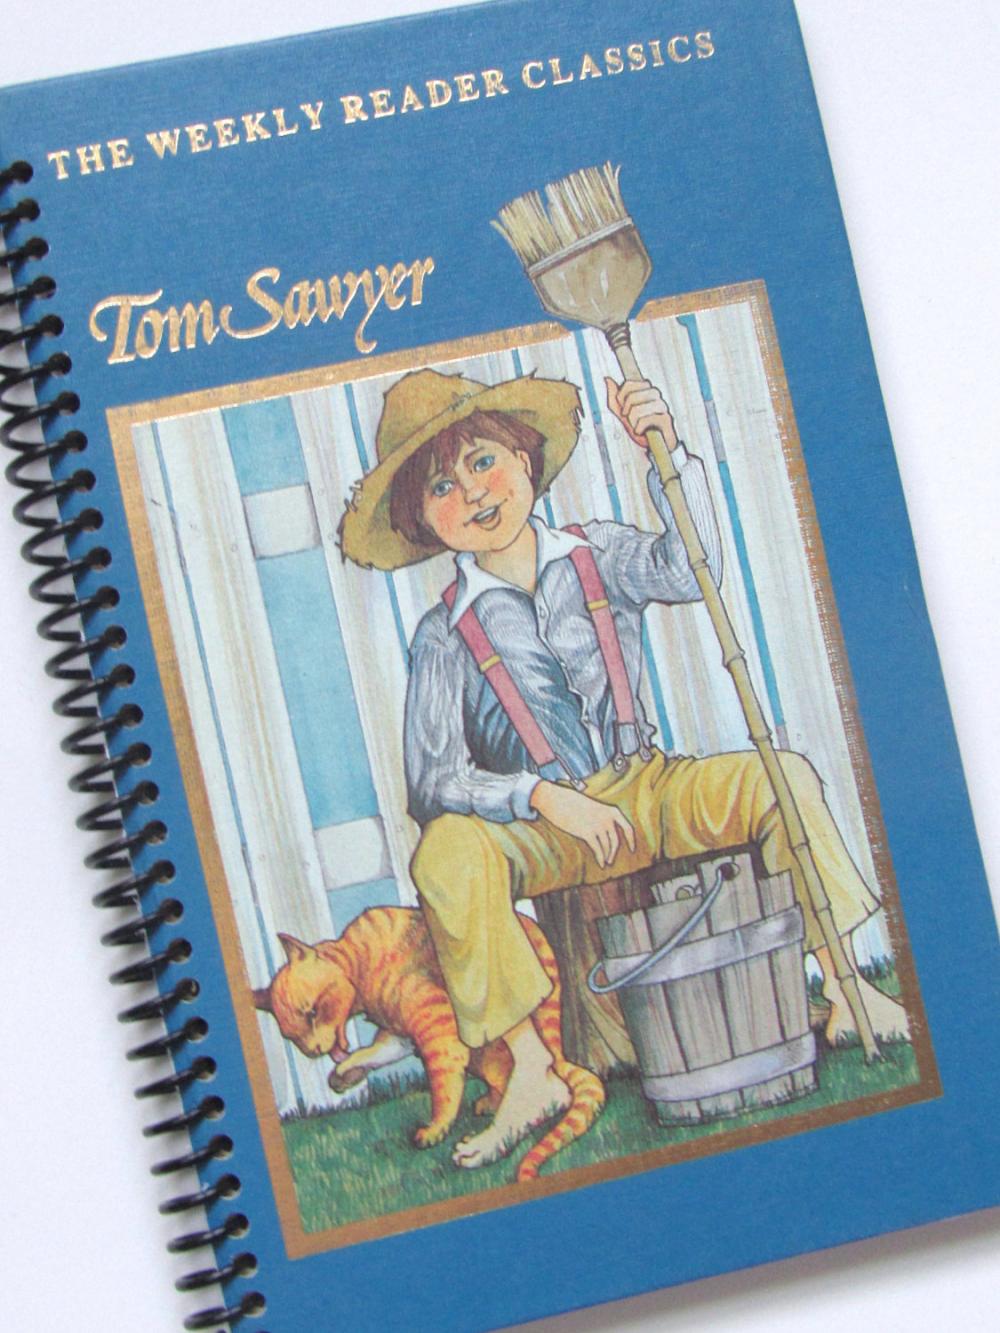 Tom Sawyer Journal Notebook Classic Mark Twain Book Recycled Upcycled Spiral Bound Weekly Reader Classics